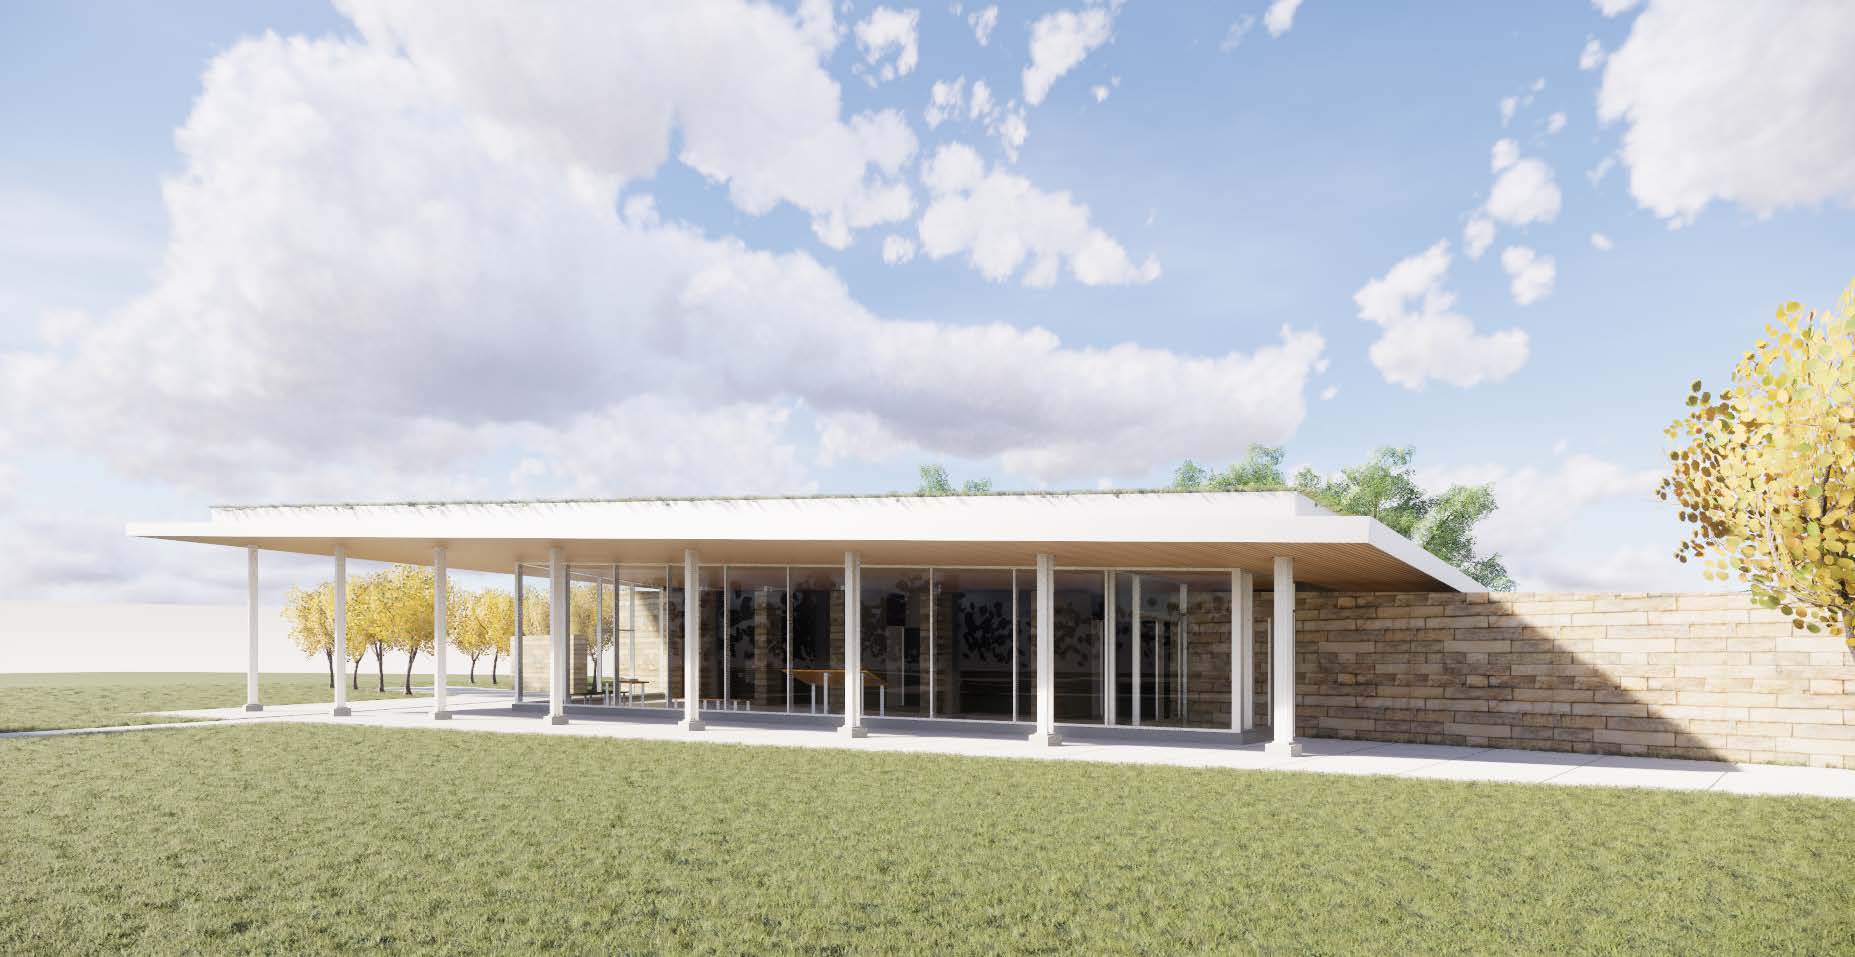 Photo: Rendering of the Clear Lake rest area